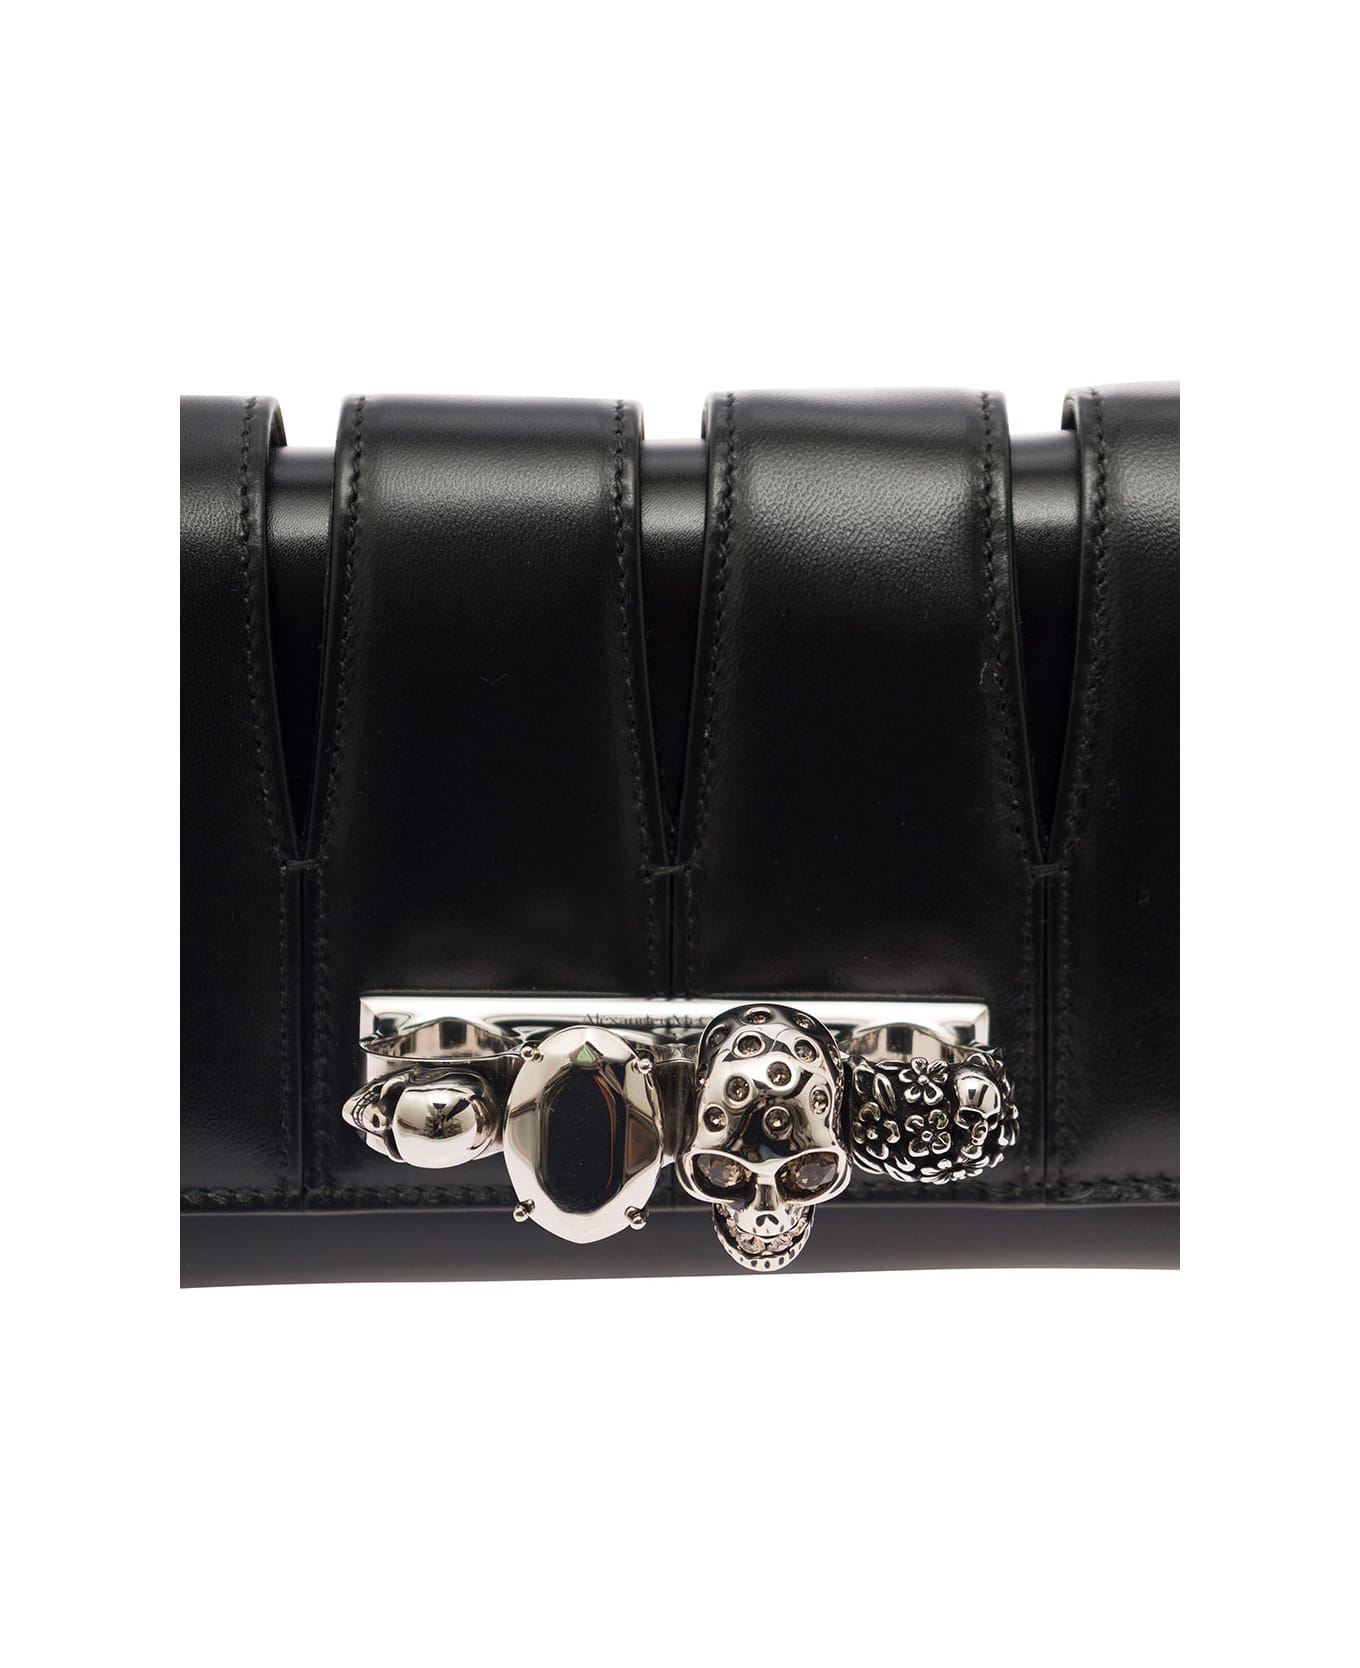 Alexander McQueen 'the Slush' Black Clutch With Skull Detail In Leather Woman - Black ショルダーバッグ